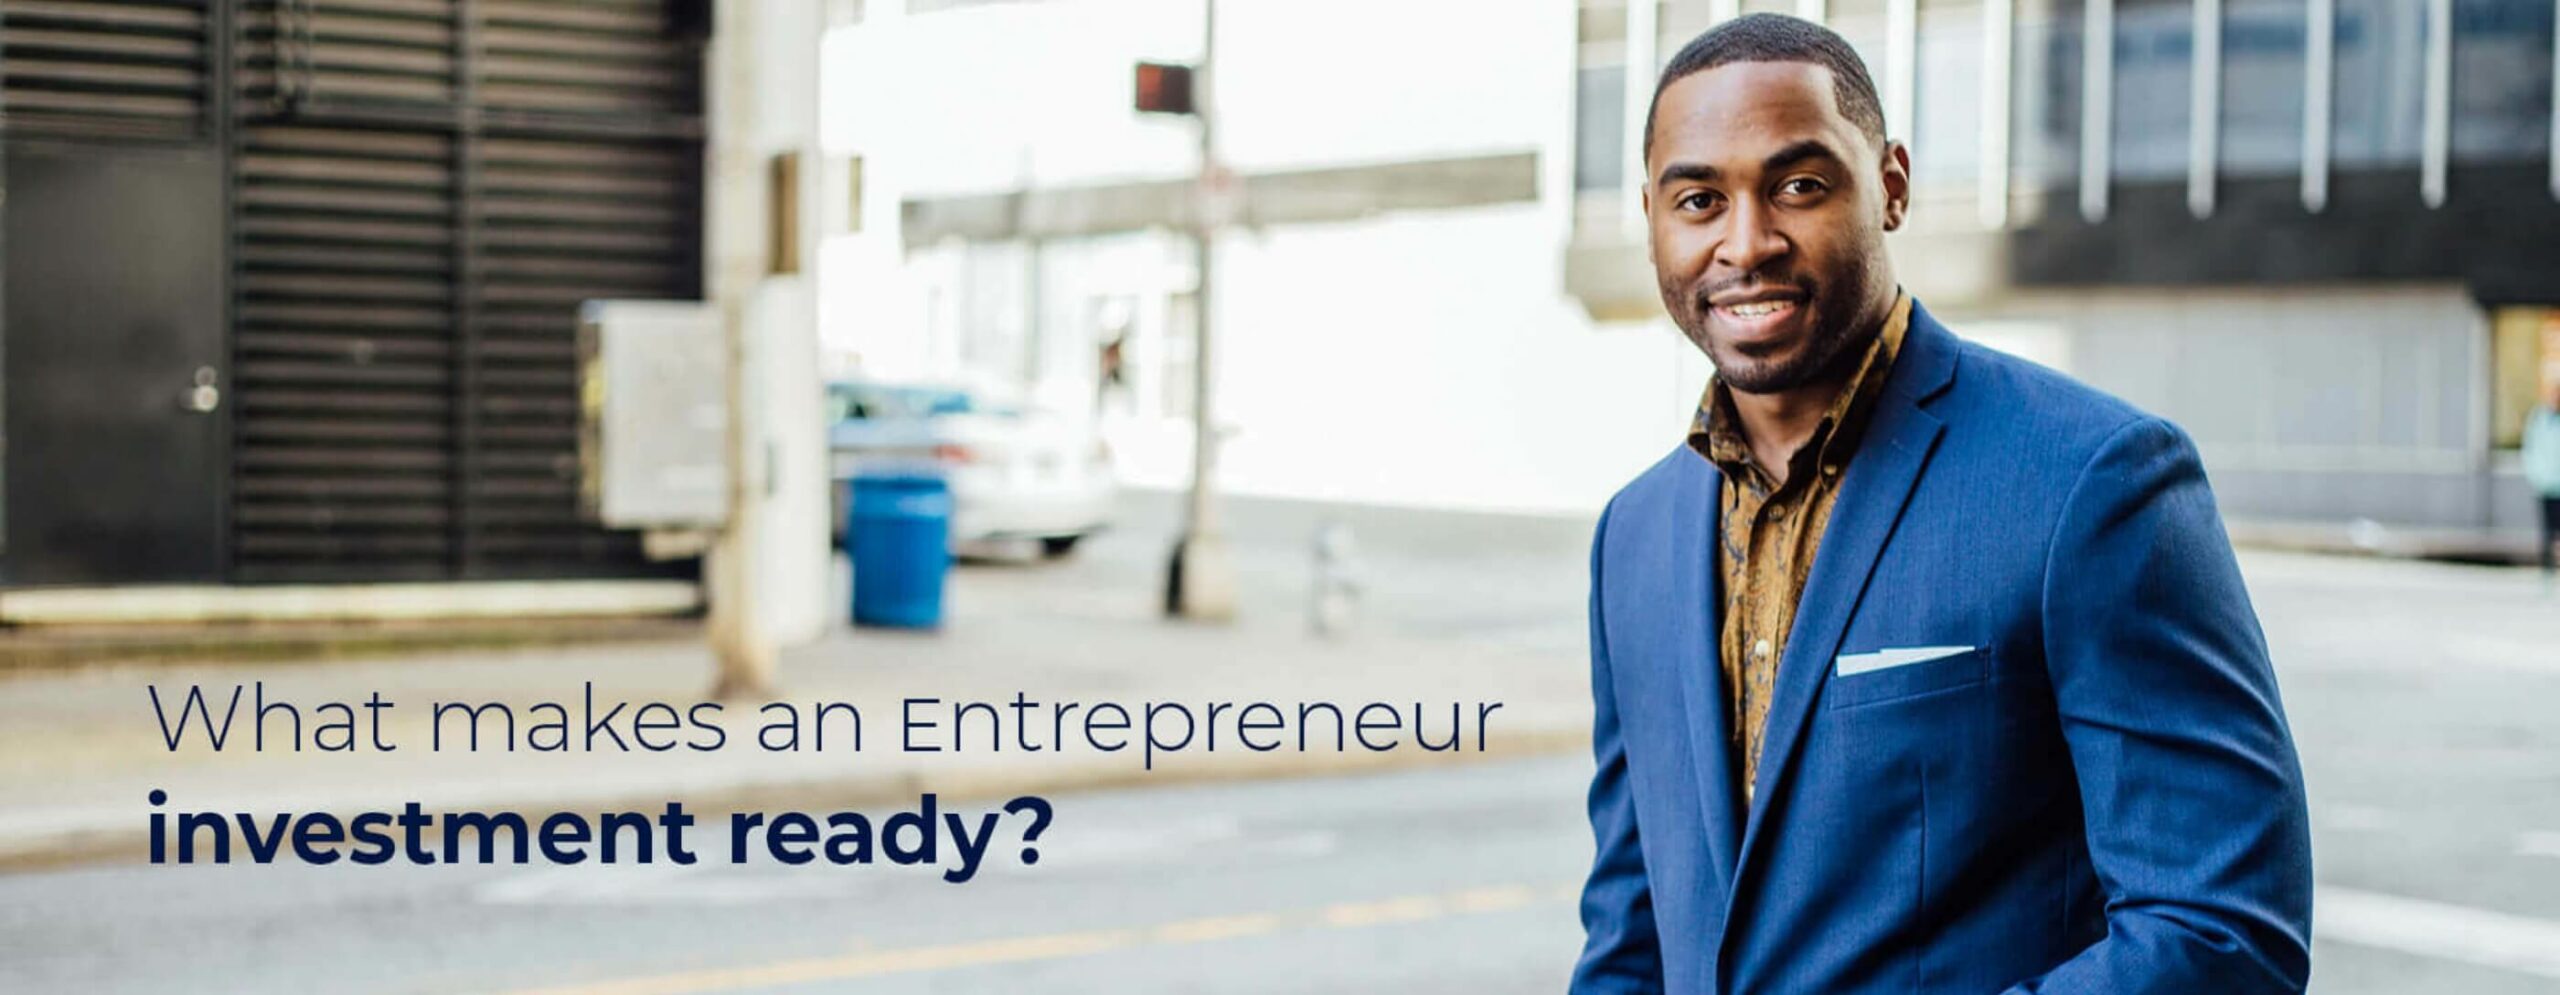 Edge Growth Esd What Makes An Entrepreneur Investment Ready